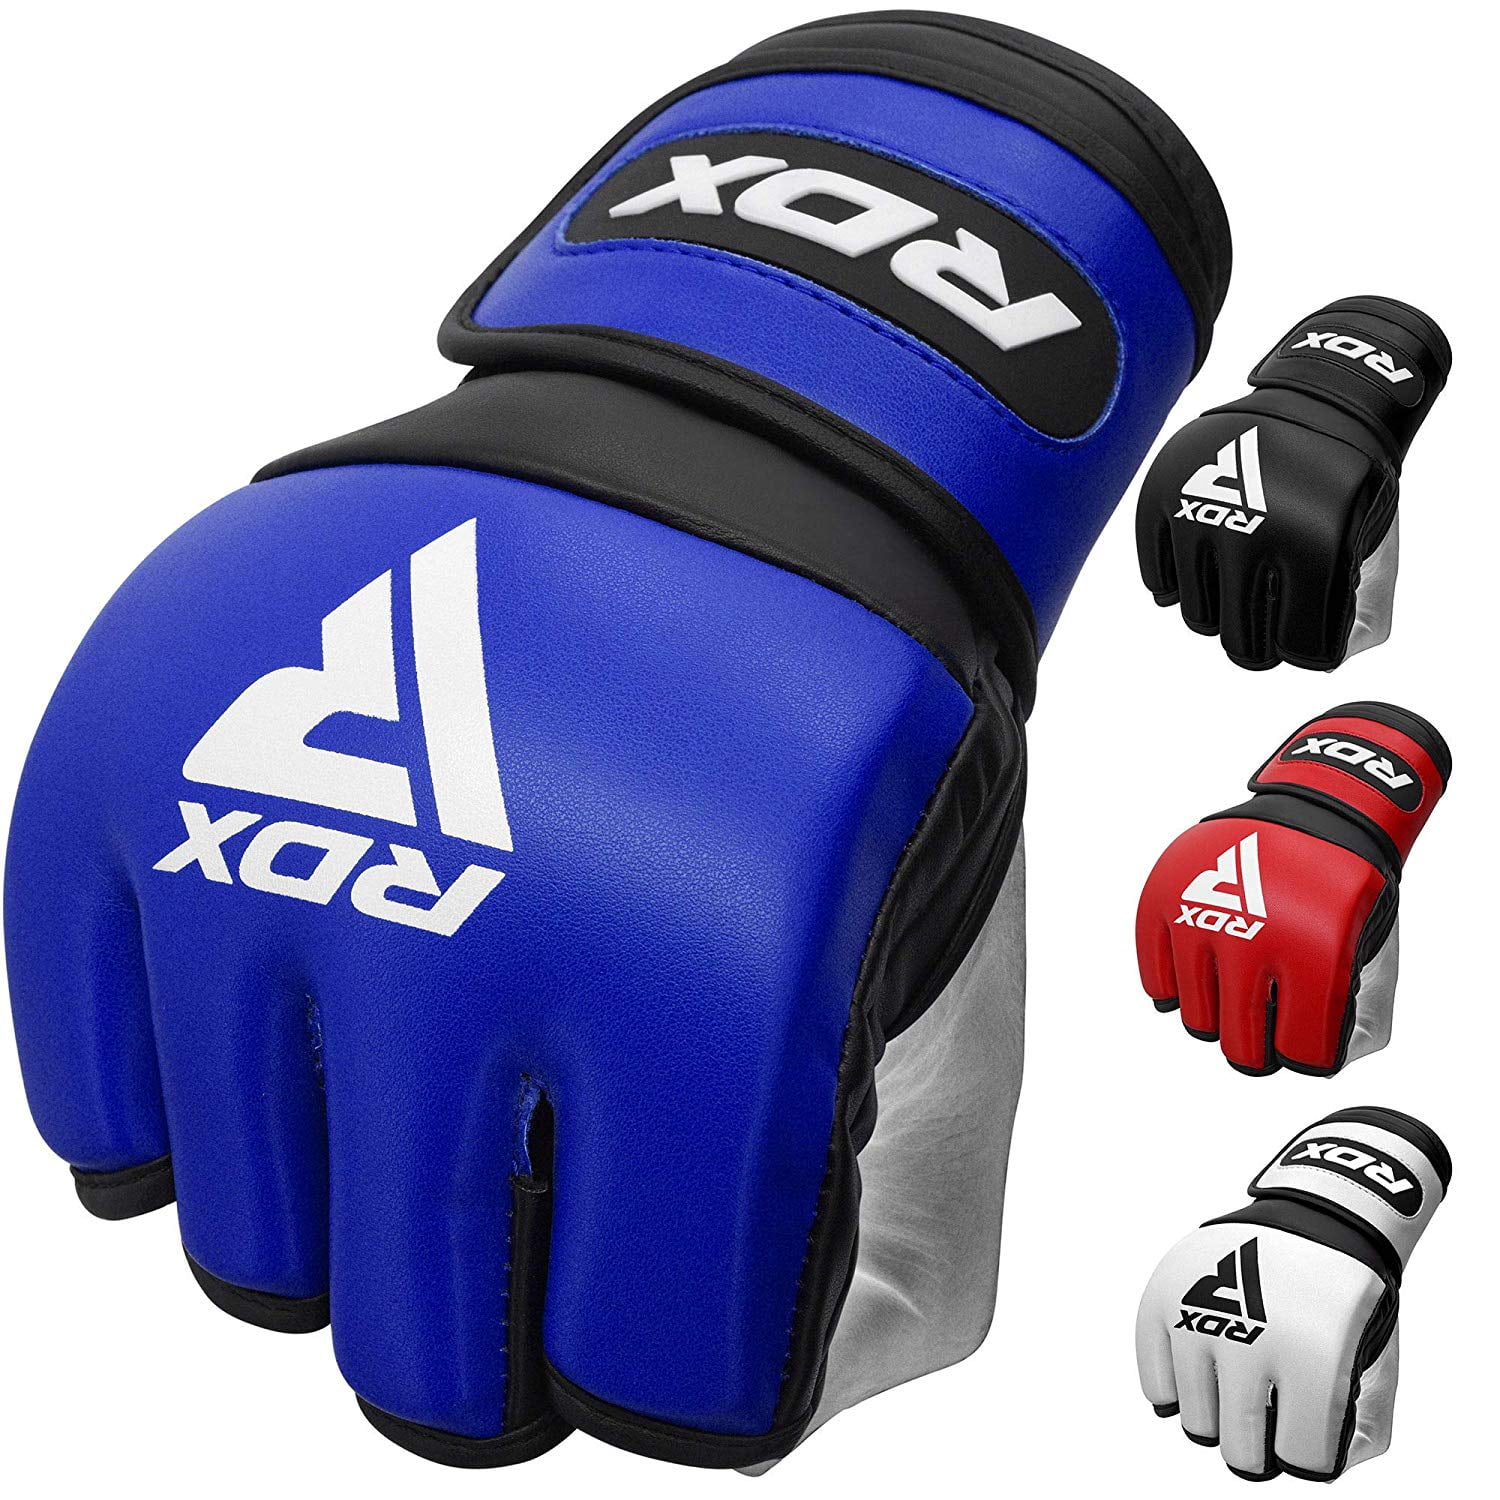 Details about   Boxing Fist Hand Inner Gloves Bandages MMA Muay Thai Punch Wraps White S/M L/XL 